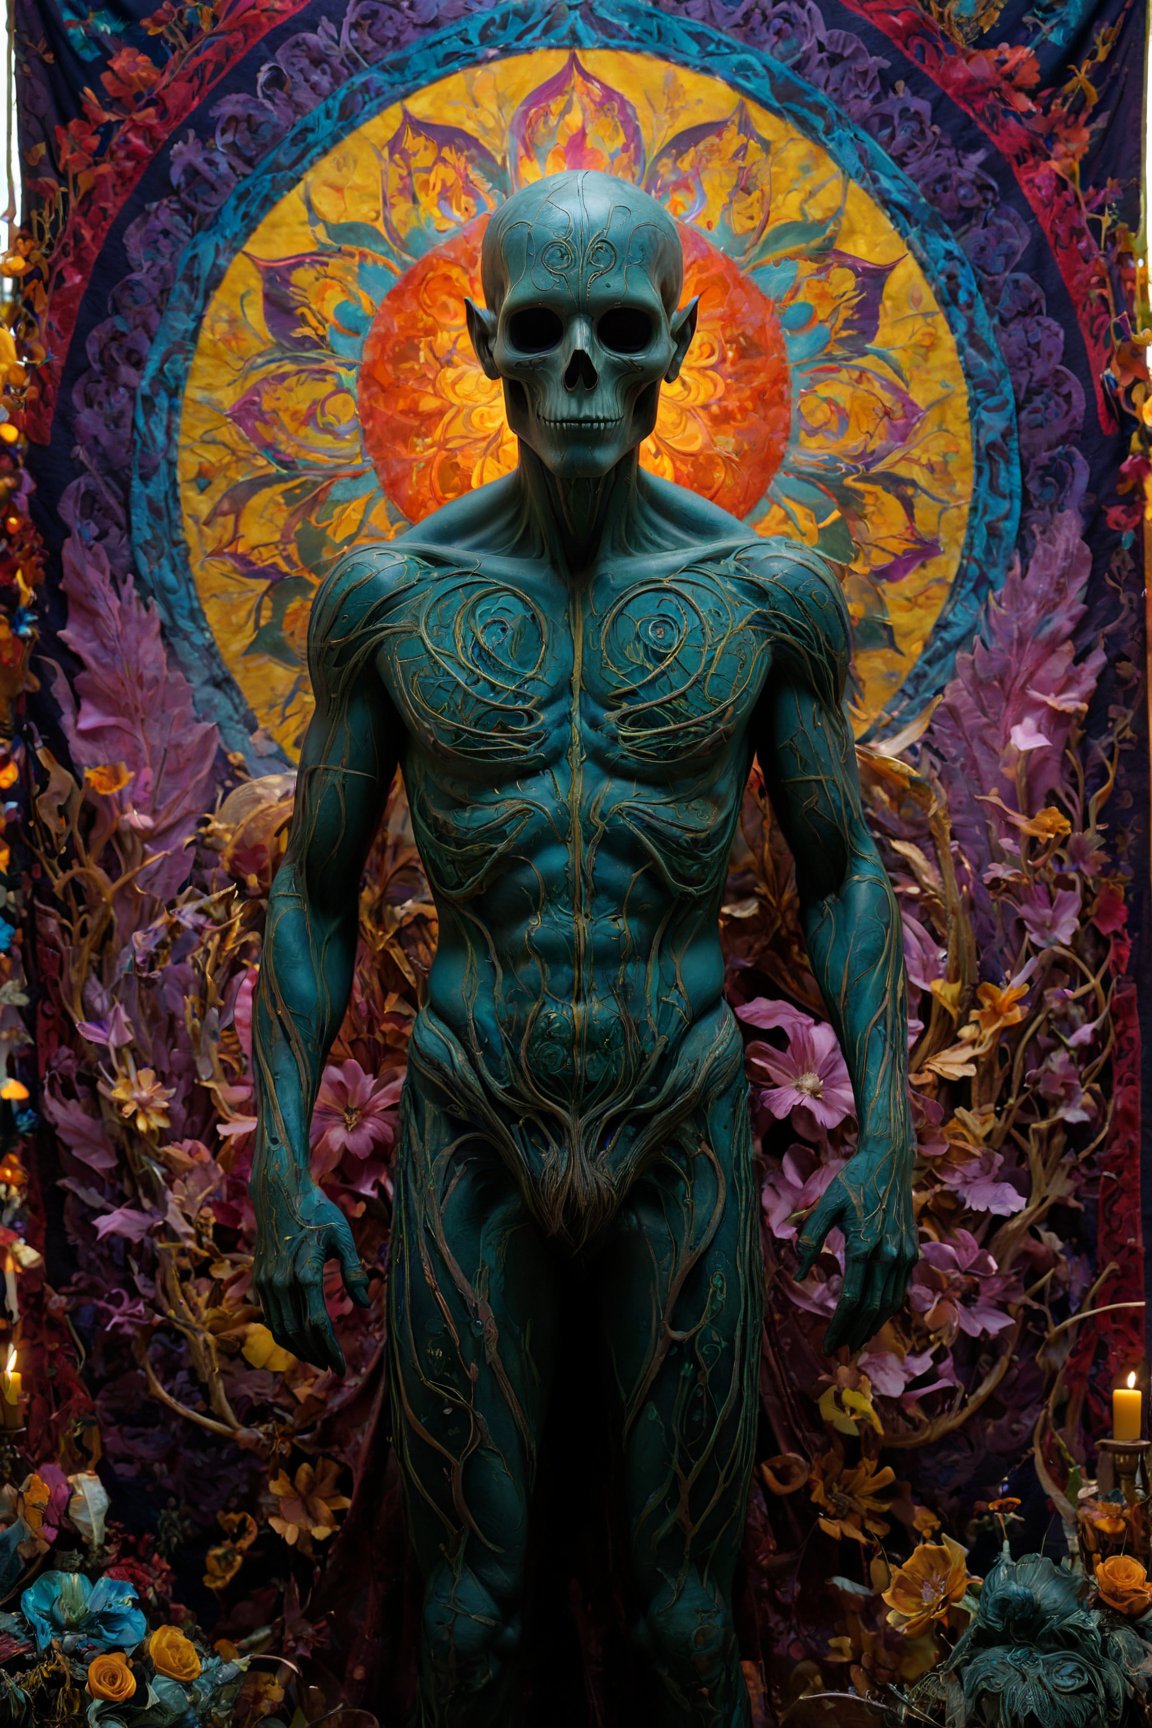 (best quality,8K,highres,masterpiece), ultra-detailed, (super colorful, hauntingly beautiful), portrayal of a captivating corpo seco. This mysterious being, with its decaying human body, is adorned in a mesmerizing tapestry of intricate patterns and symbols that explode with a vibrant and enchanting array of colors. It stands tall in a desolate yet mesmerizing graveyard, where the radiant colors of the patterns and symbols contrast vividly with the eerie surroundings, creating a spellbinding and unforgettable masterpiece that blurs the line between beauty and the macabre.